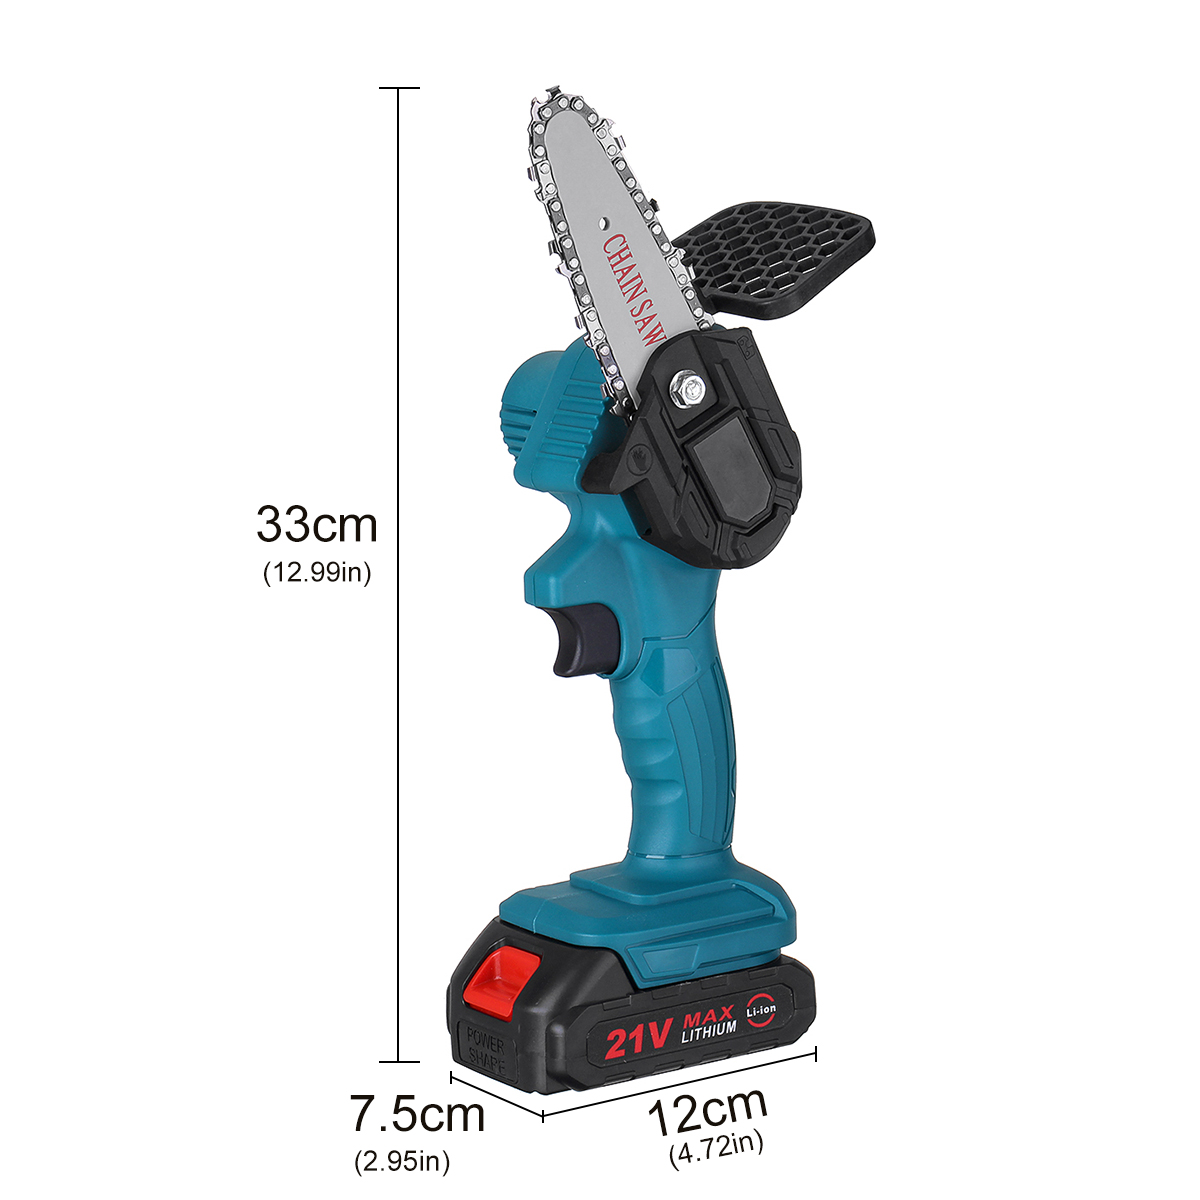 4-Inch-21V-Cordless-Electric-Chain-Saw-W-01pc2pcs-Batteries-For-Tree-Branch-Wood-Cutting-Tool-1804698-10